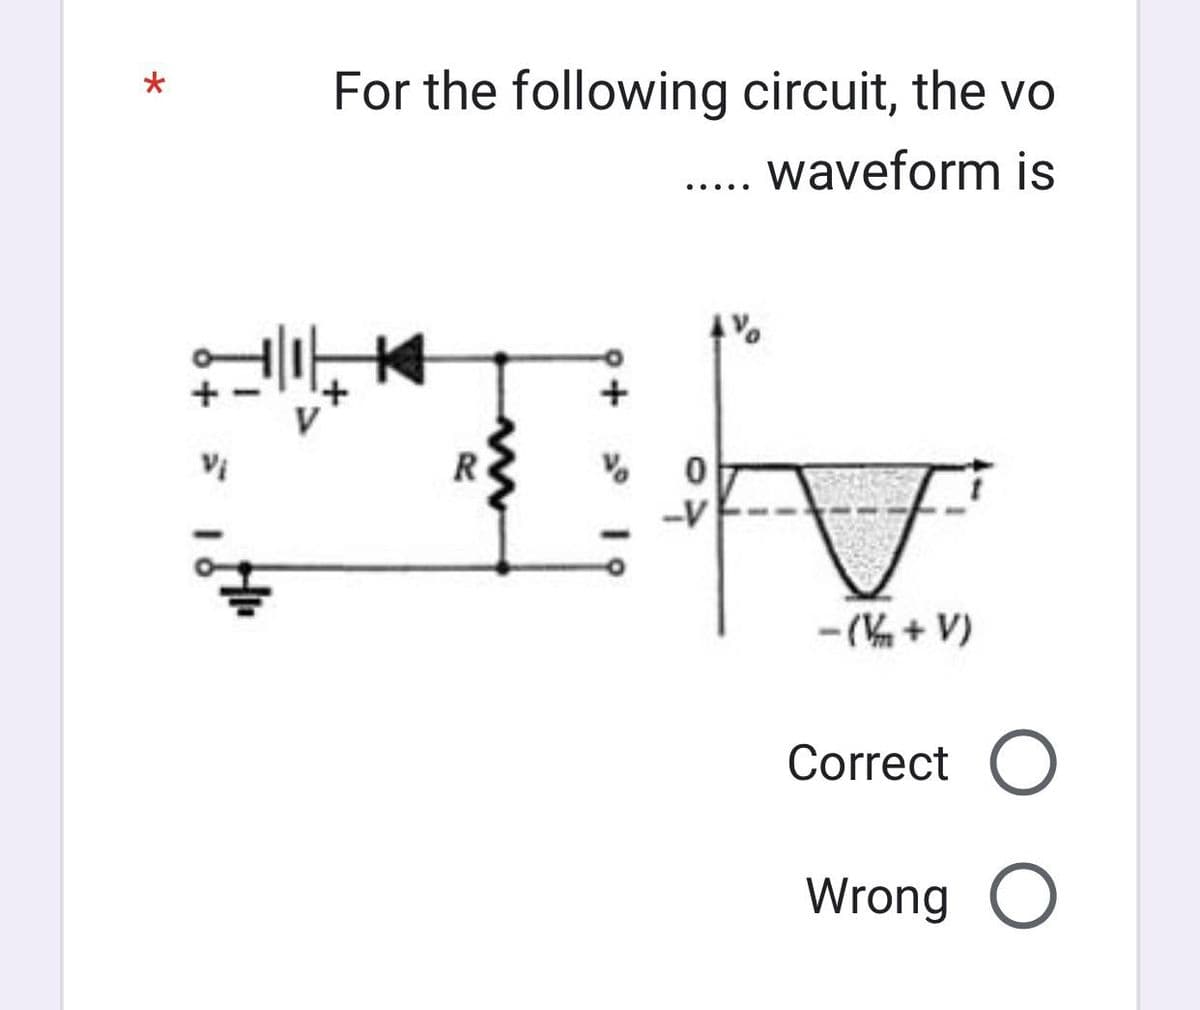 *
For the following circuit, the vo
waveform is
+
.....
0
-V
F
- (+V)
Correct O
Wrong O